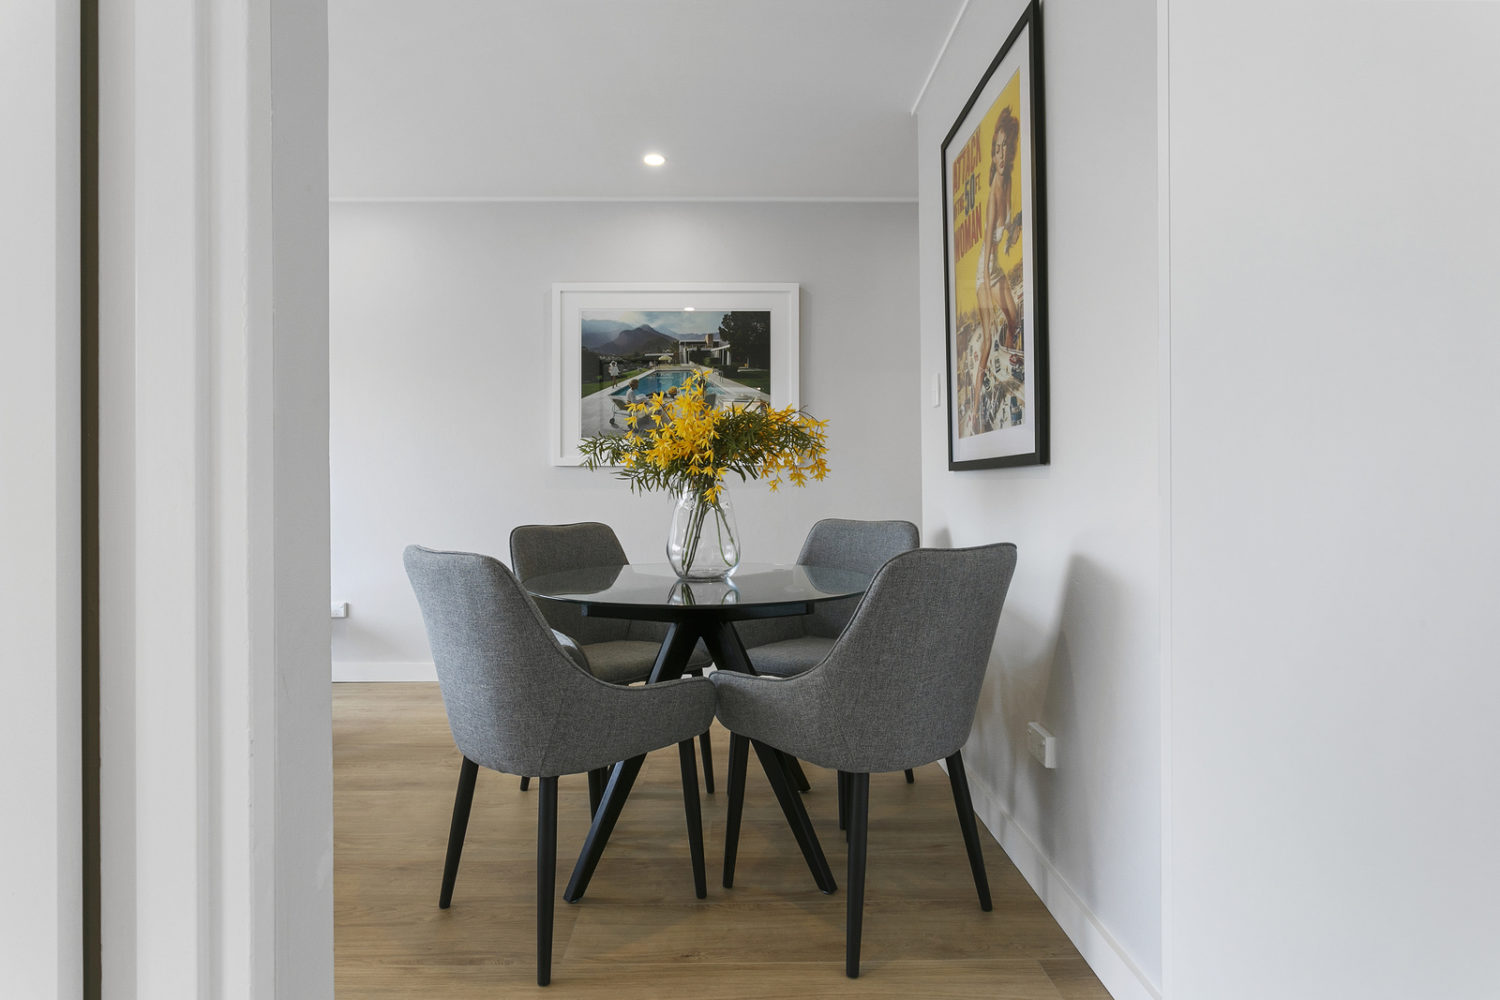 STARKEY Dulwich Hill Apartments Dining Room